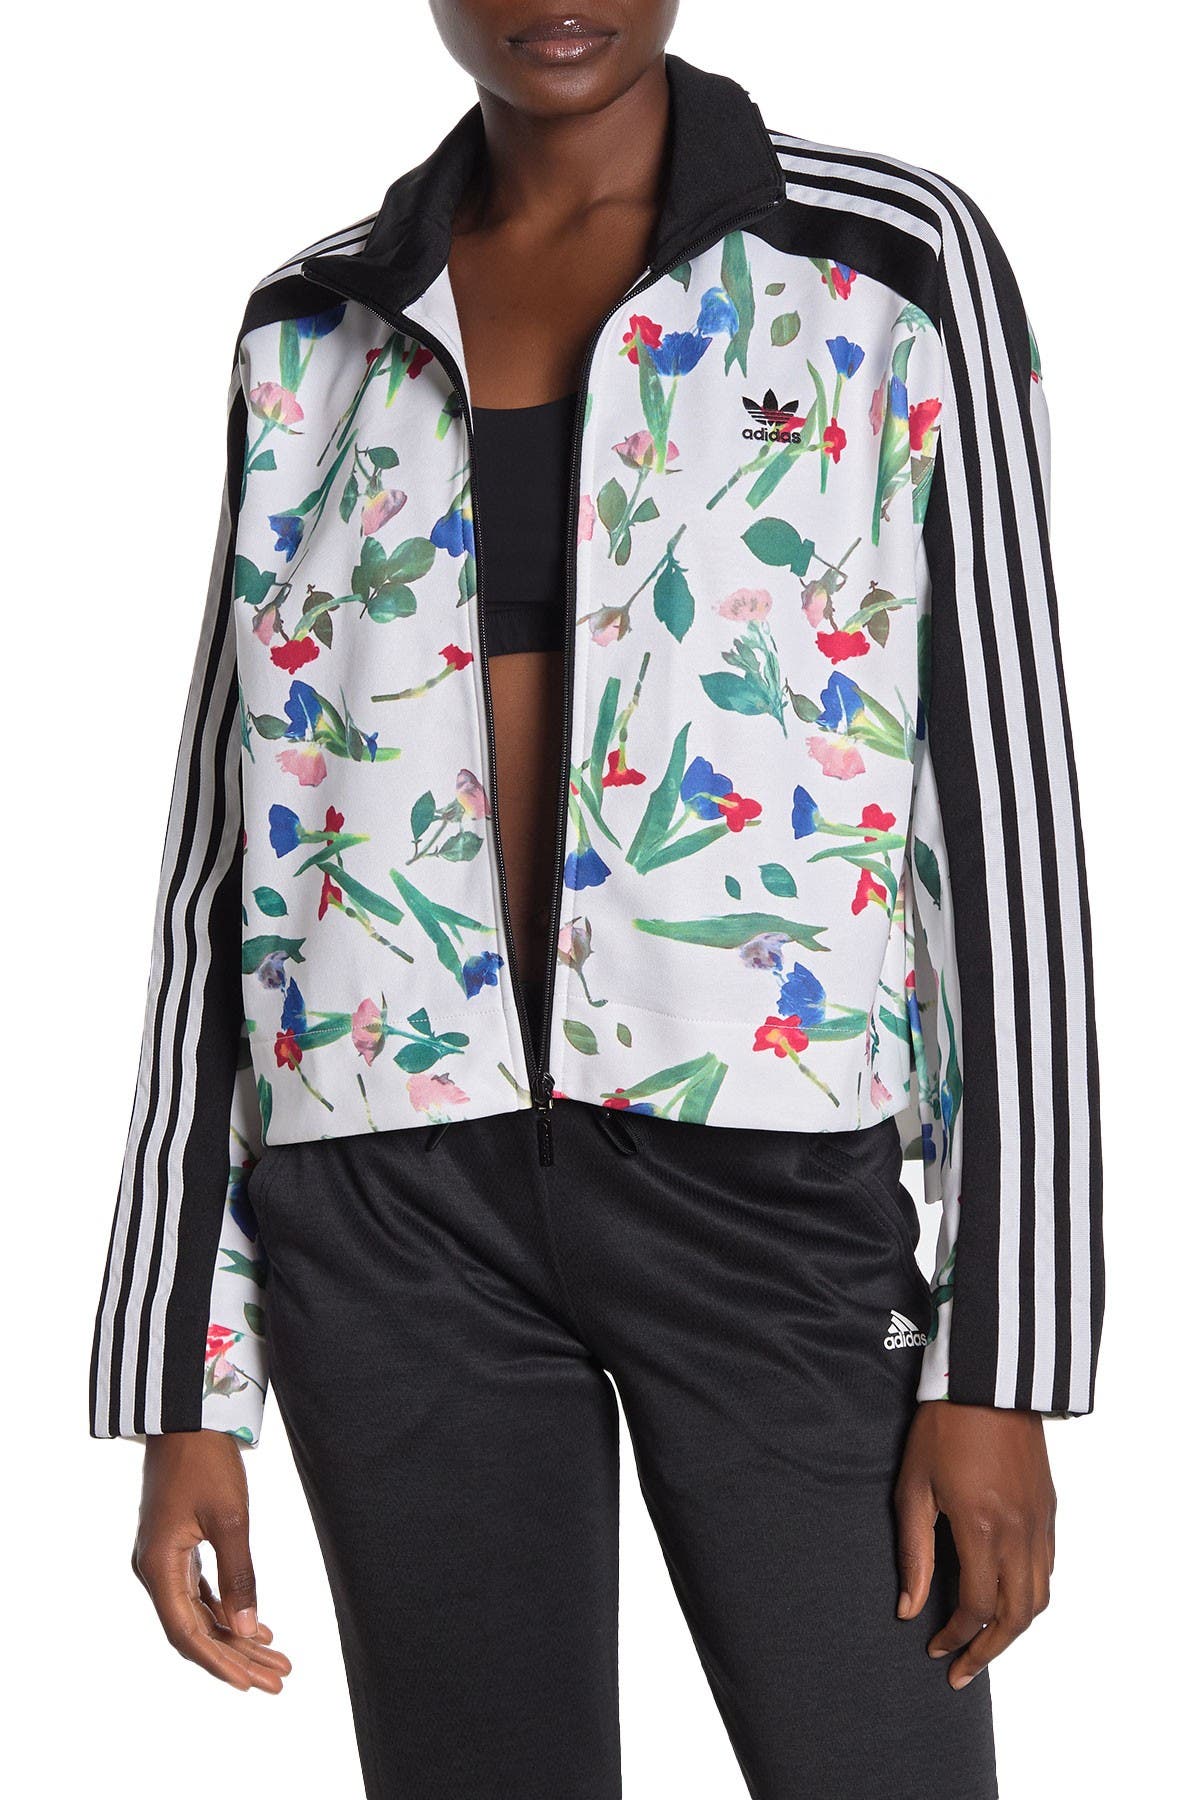 adidas track jacket womens floral